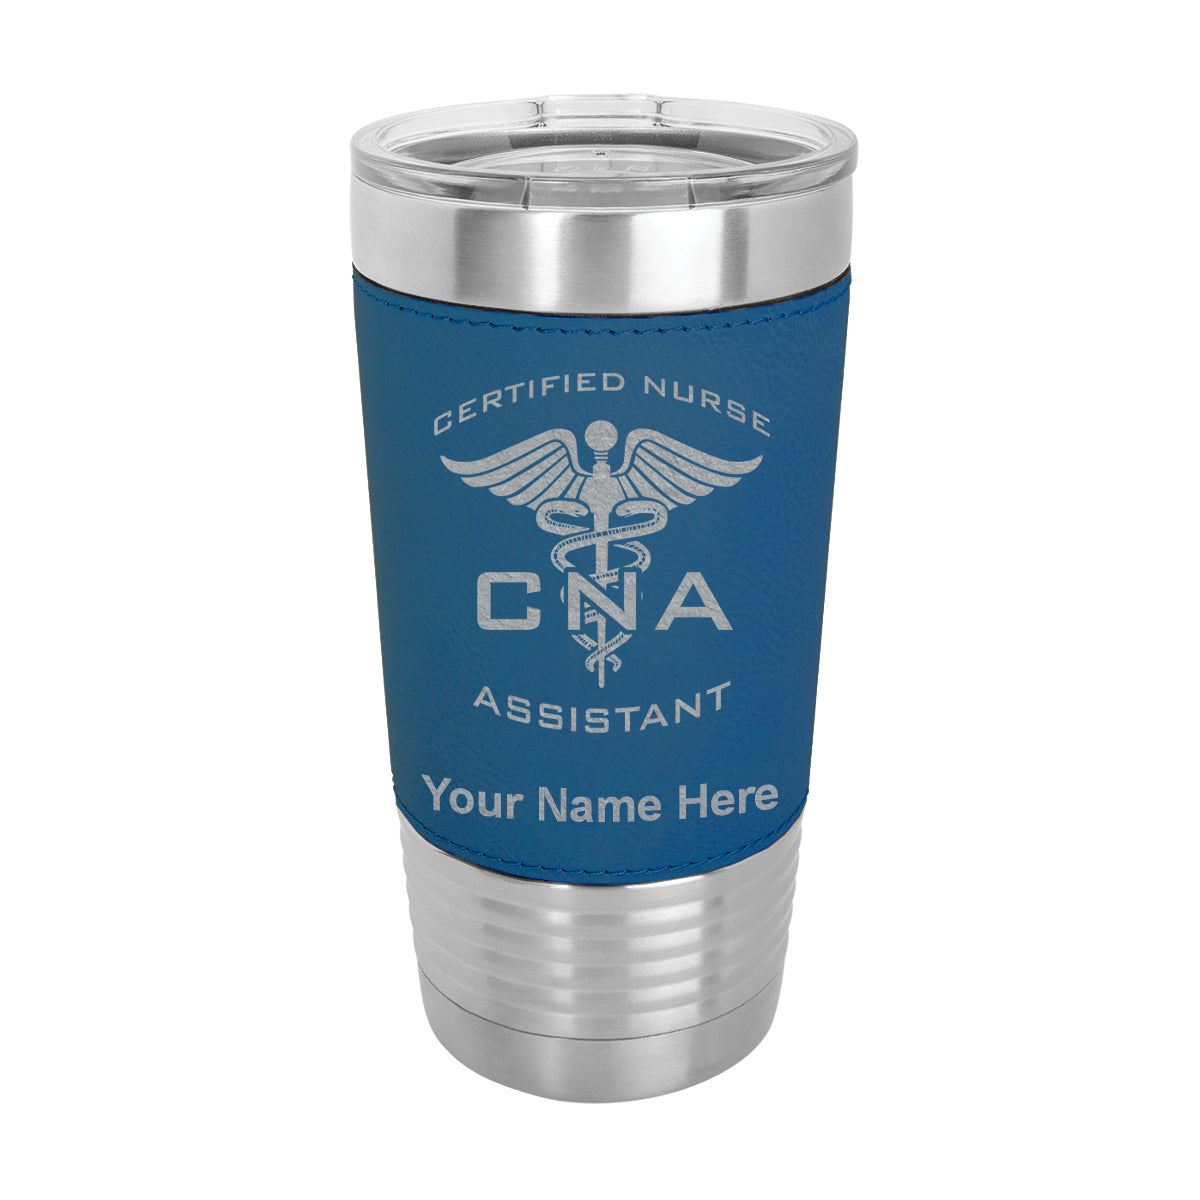 20oz Faux Leather Tumbler Mug, CNA Certified Nurse Assistant, Personalized Engraving Included - LaserGram Custom Engraved Gifts